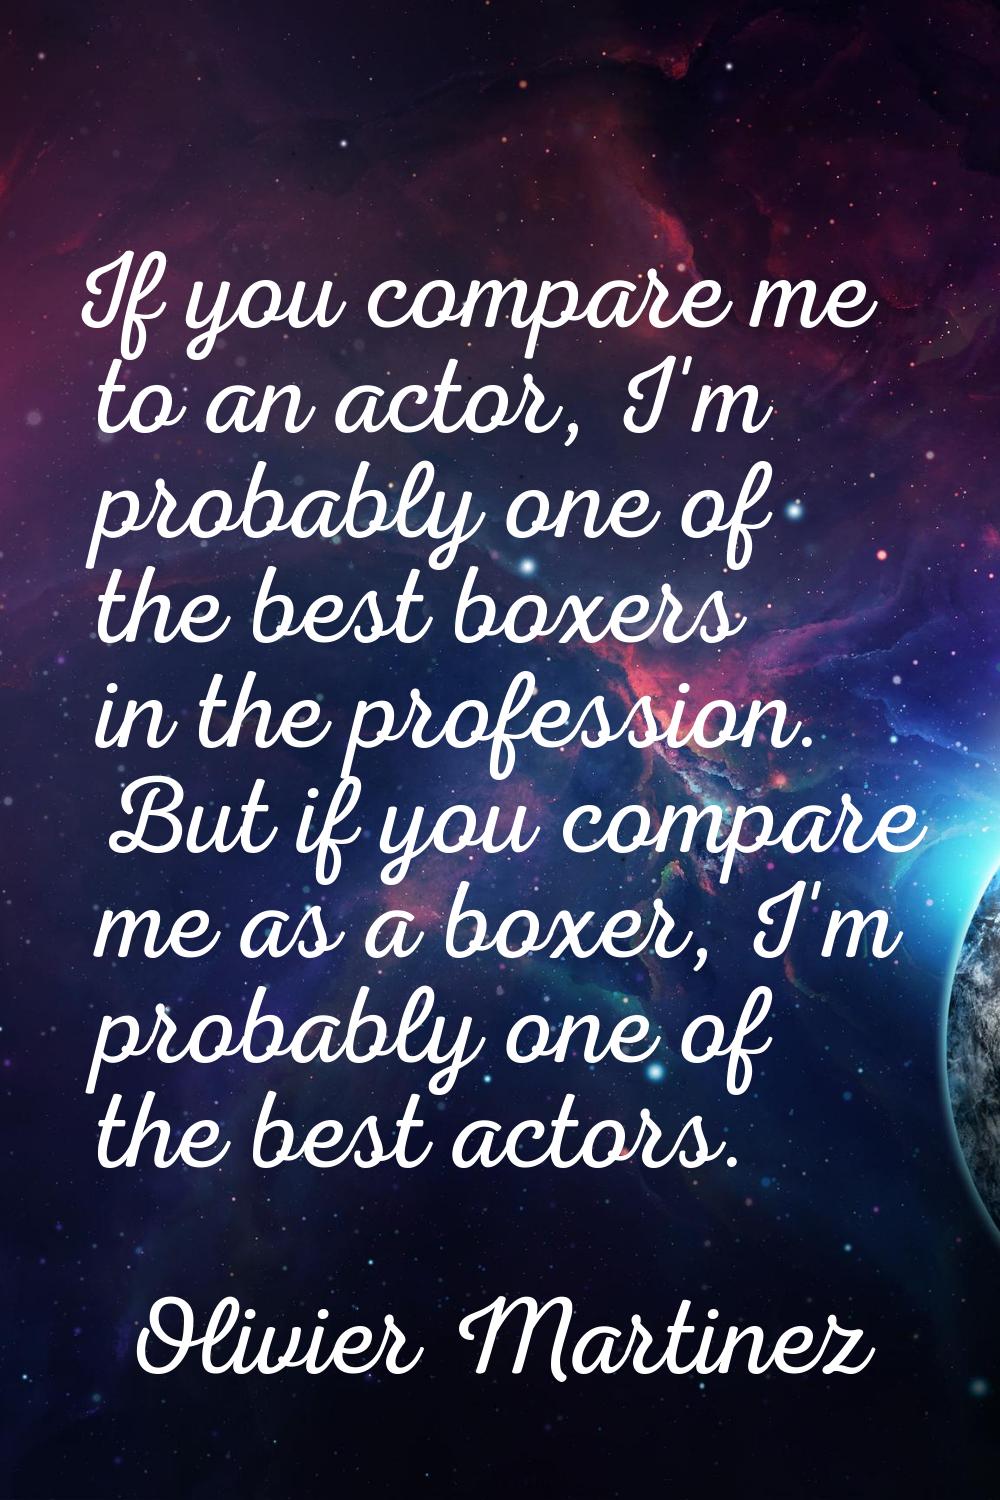 If you compare me to an actor, I'm probably one of the best boxers in the profession. But if you co